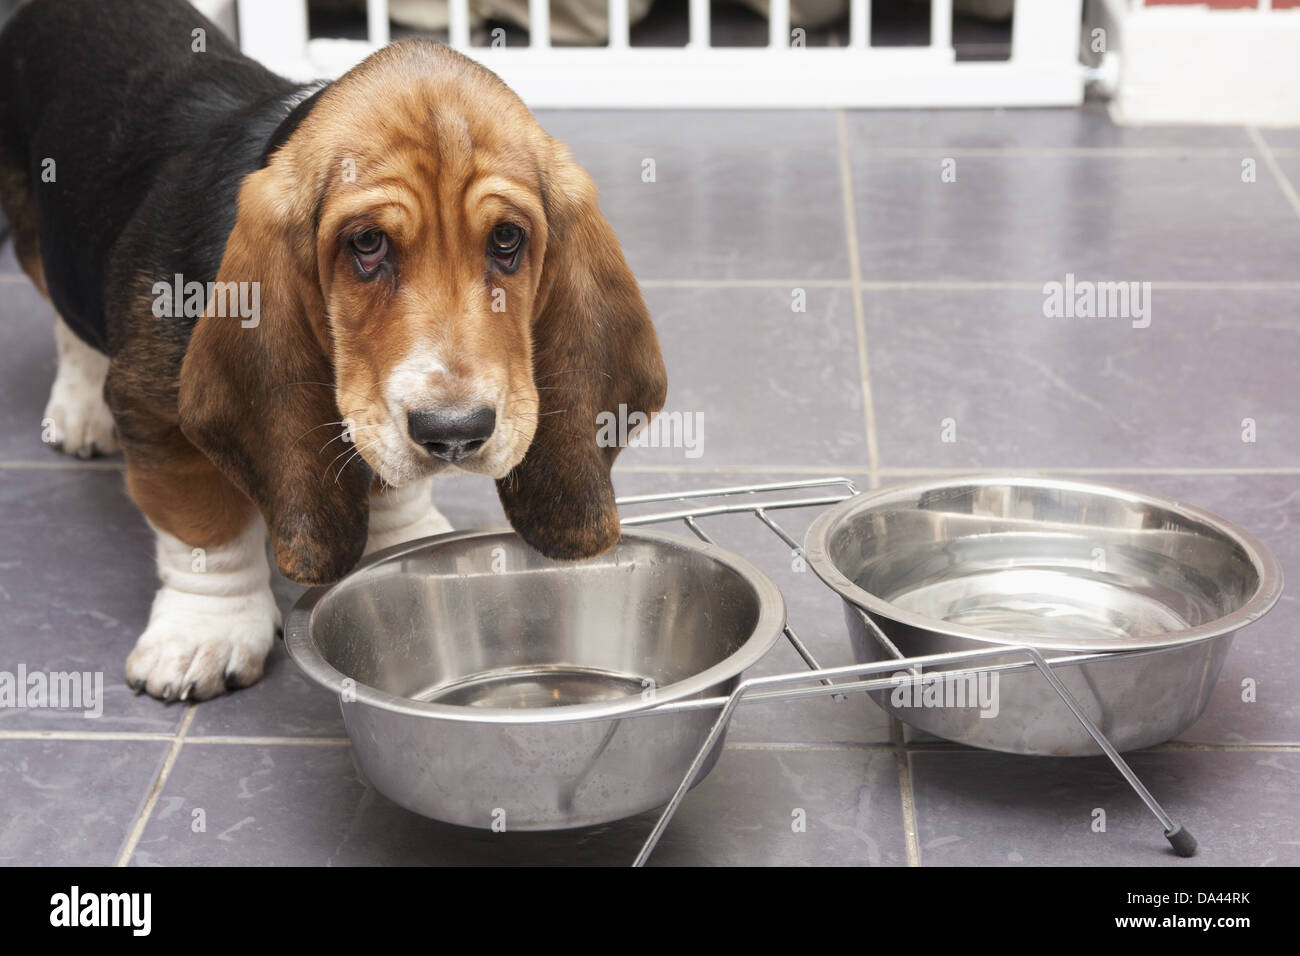 Domestic Dog, Basset Hound, puppy, drinking from metal bowls on tiled floor, England, December Stock Photo